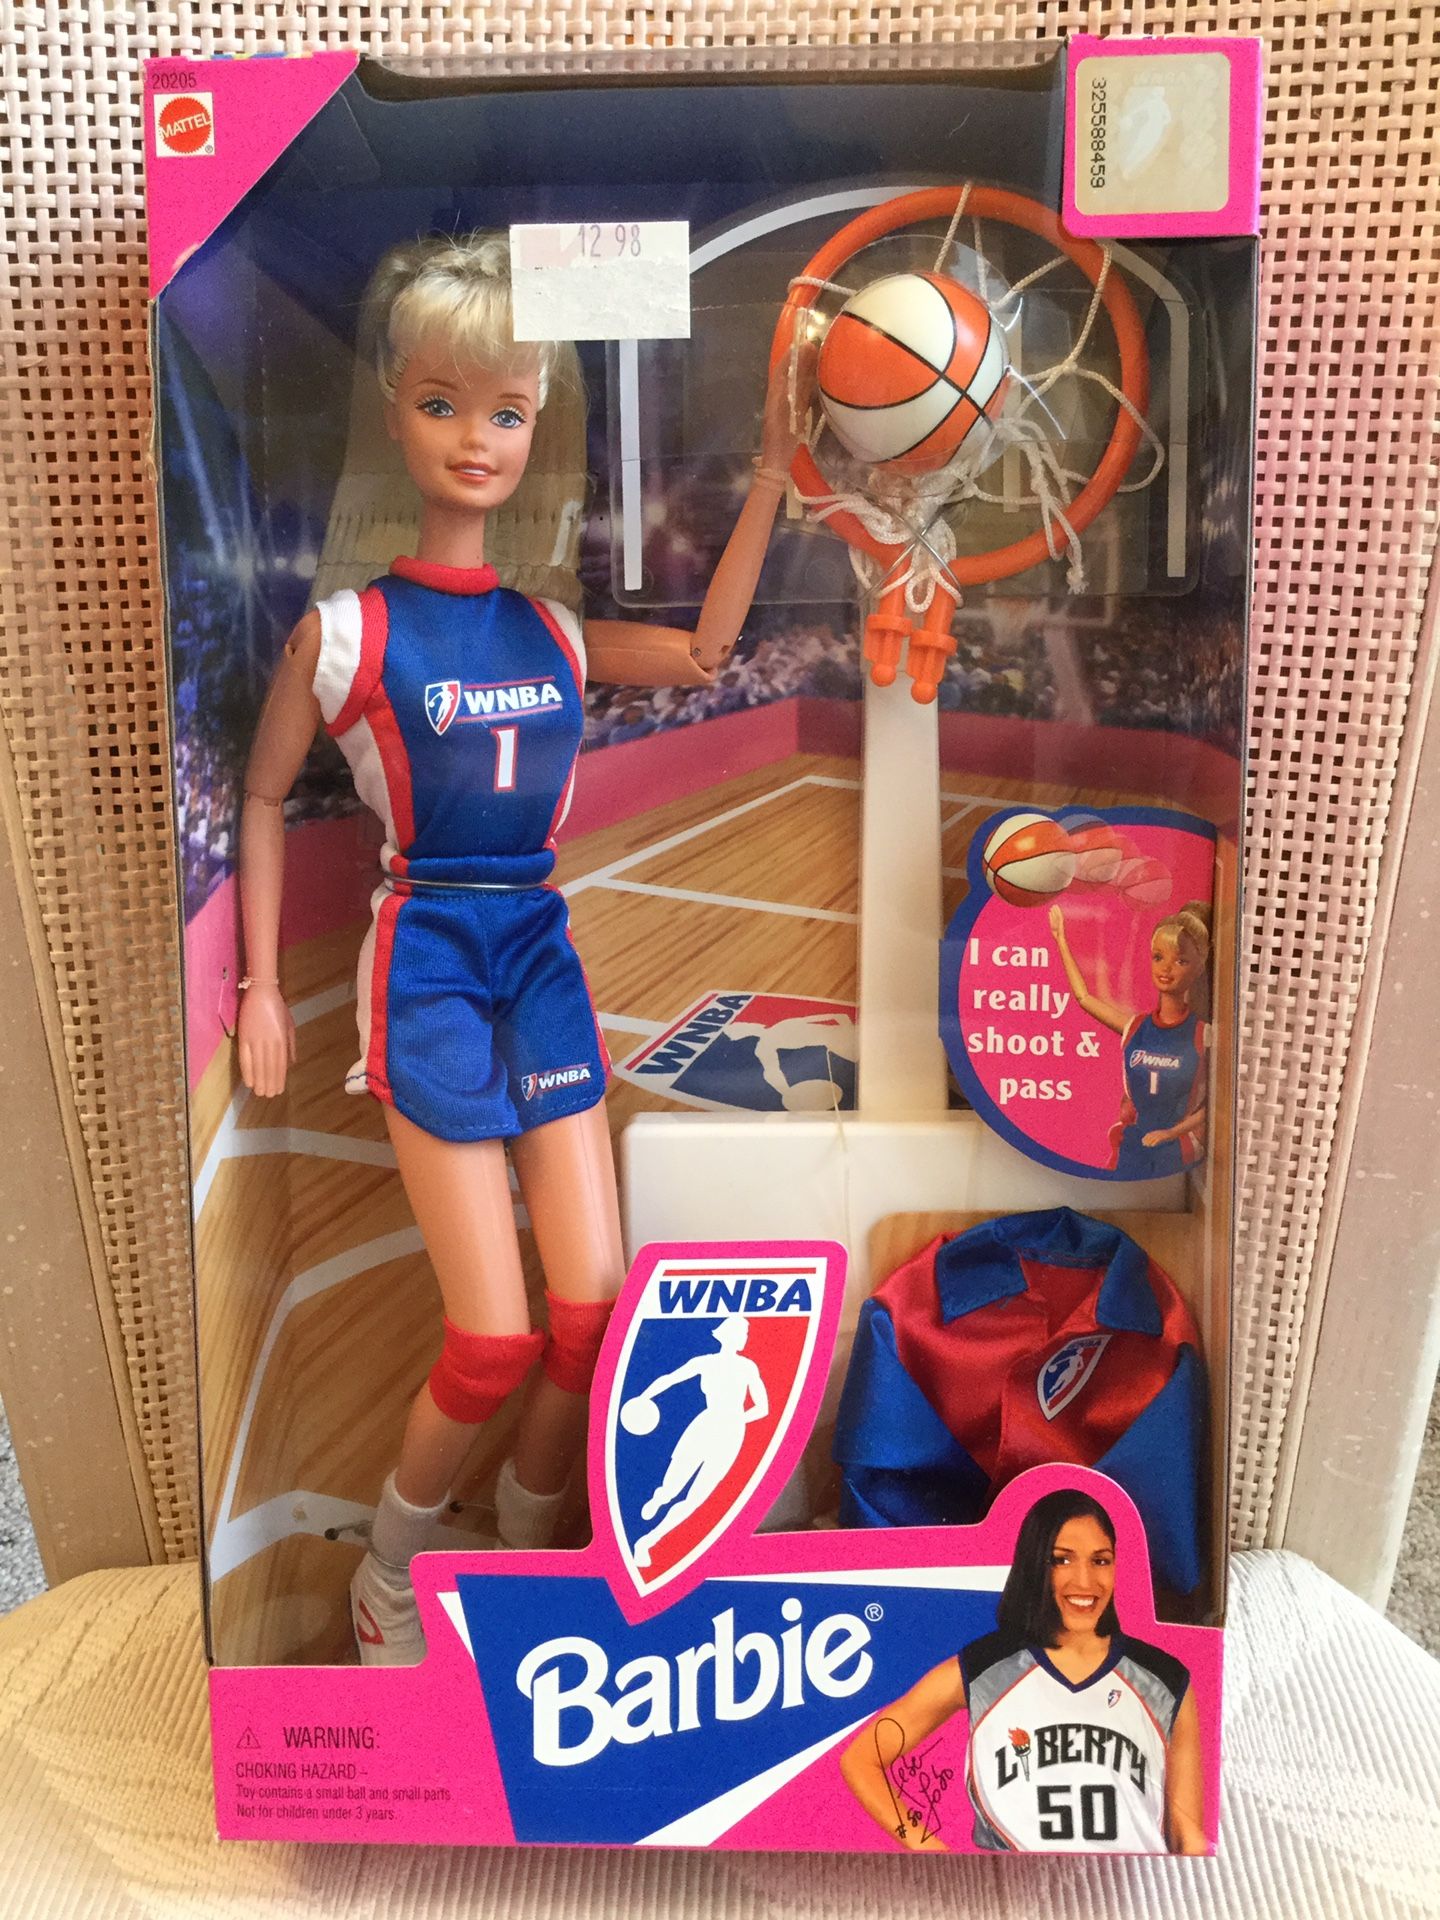 WNBA Barbie collectible 1990's — New in Box